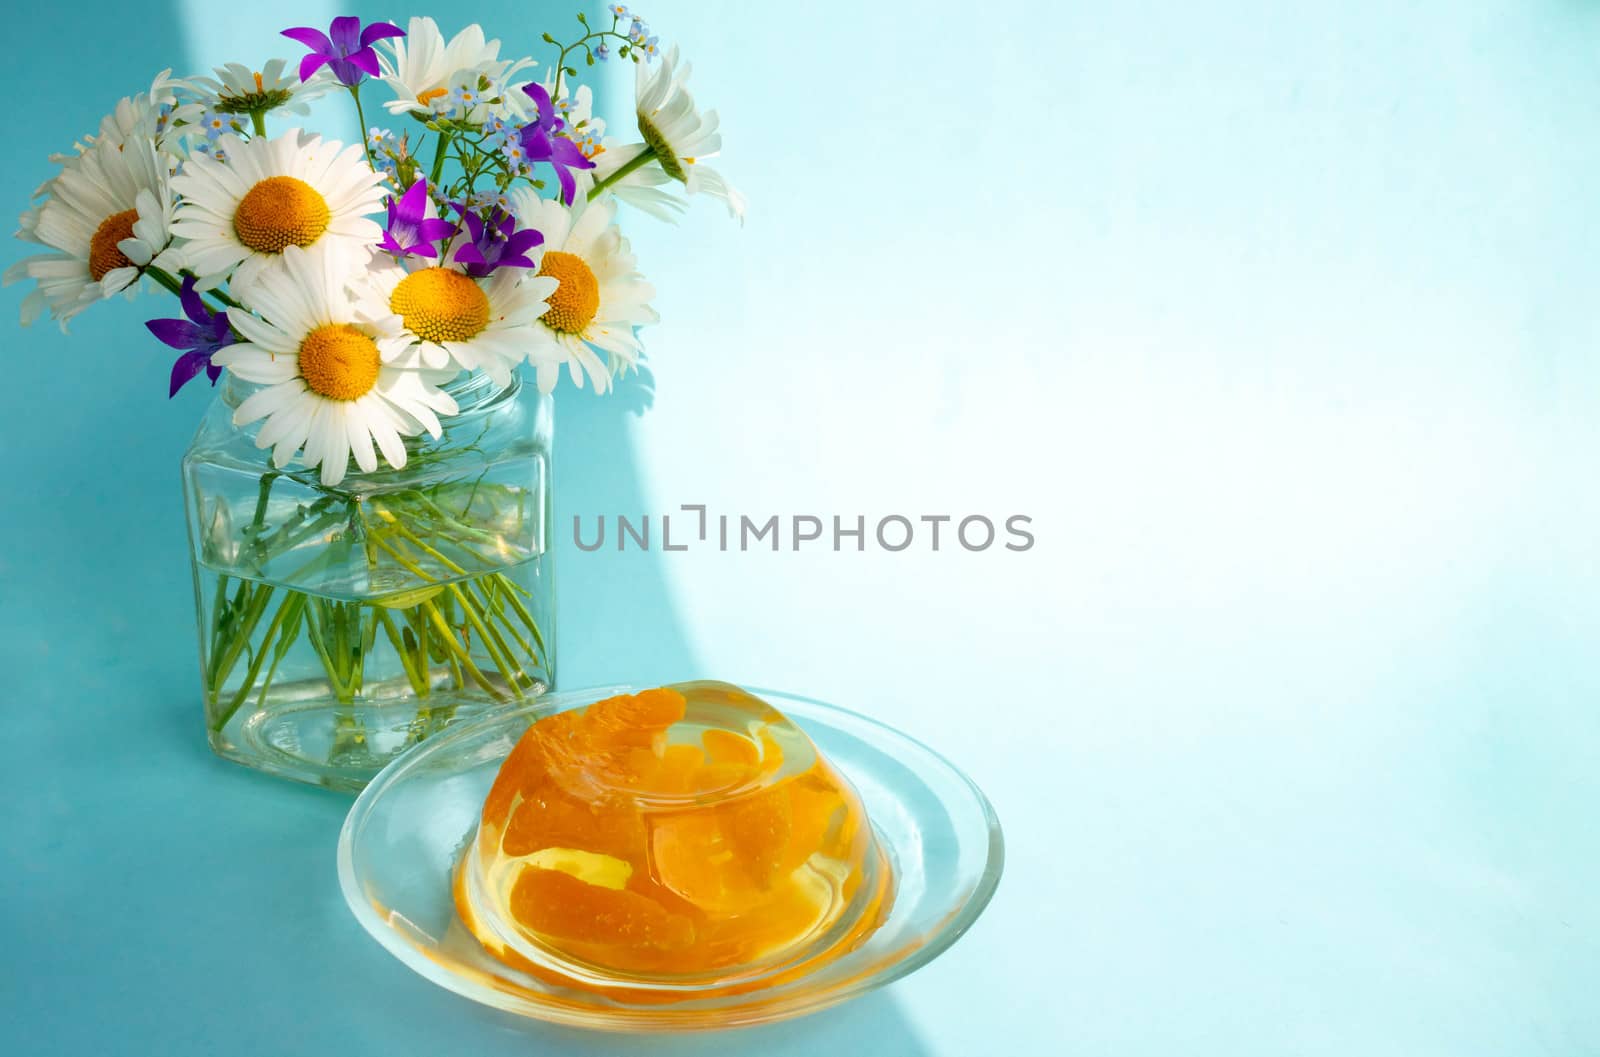 Breakfast jelly with tangerine slices and a bunch of daisies on a blue background.